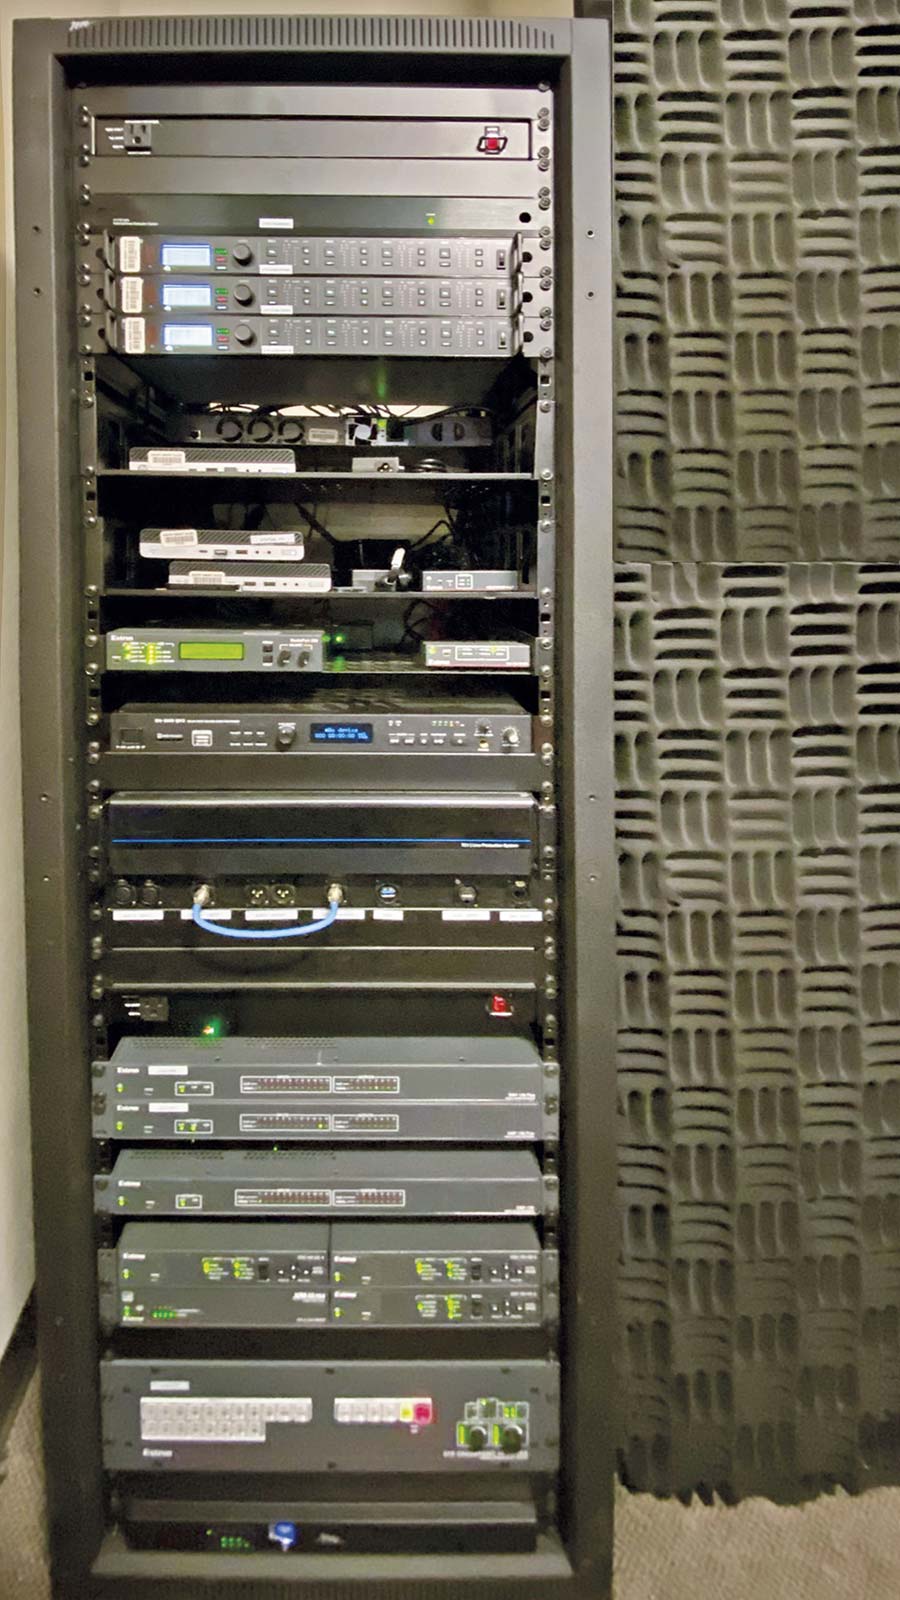 The AV system components, such as the DTP CrossPoint 108 4K IPCP MA 70 matrix switcher and the three DMP 128 audio processors, are rack-mounted within the control room - interior.